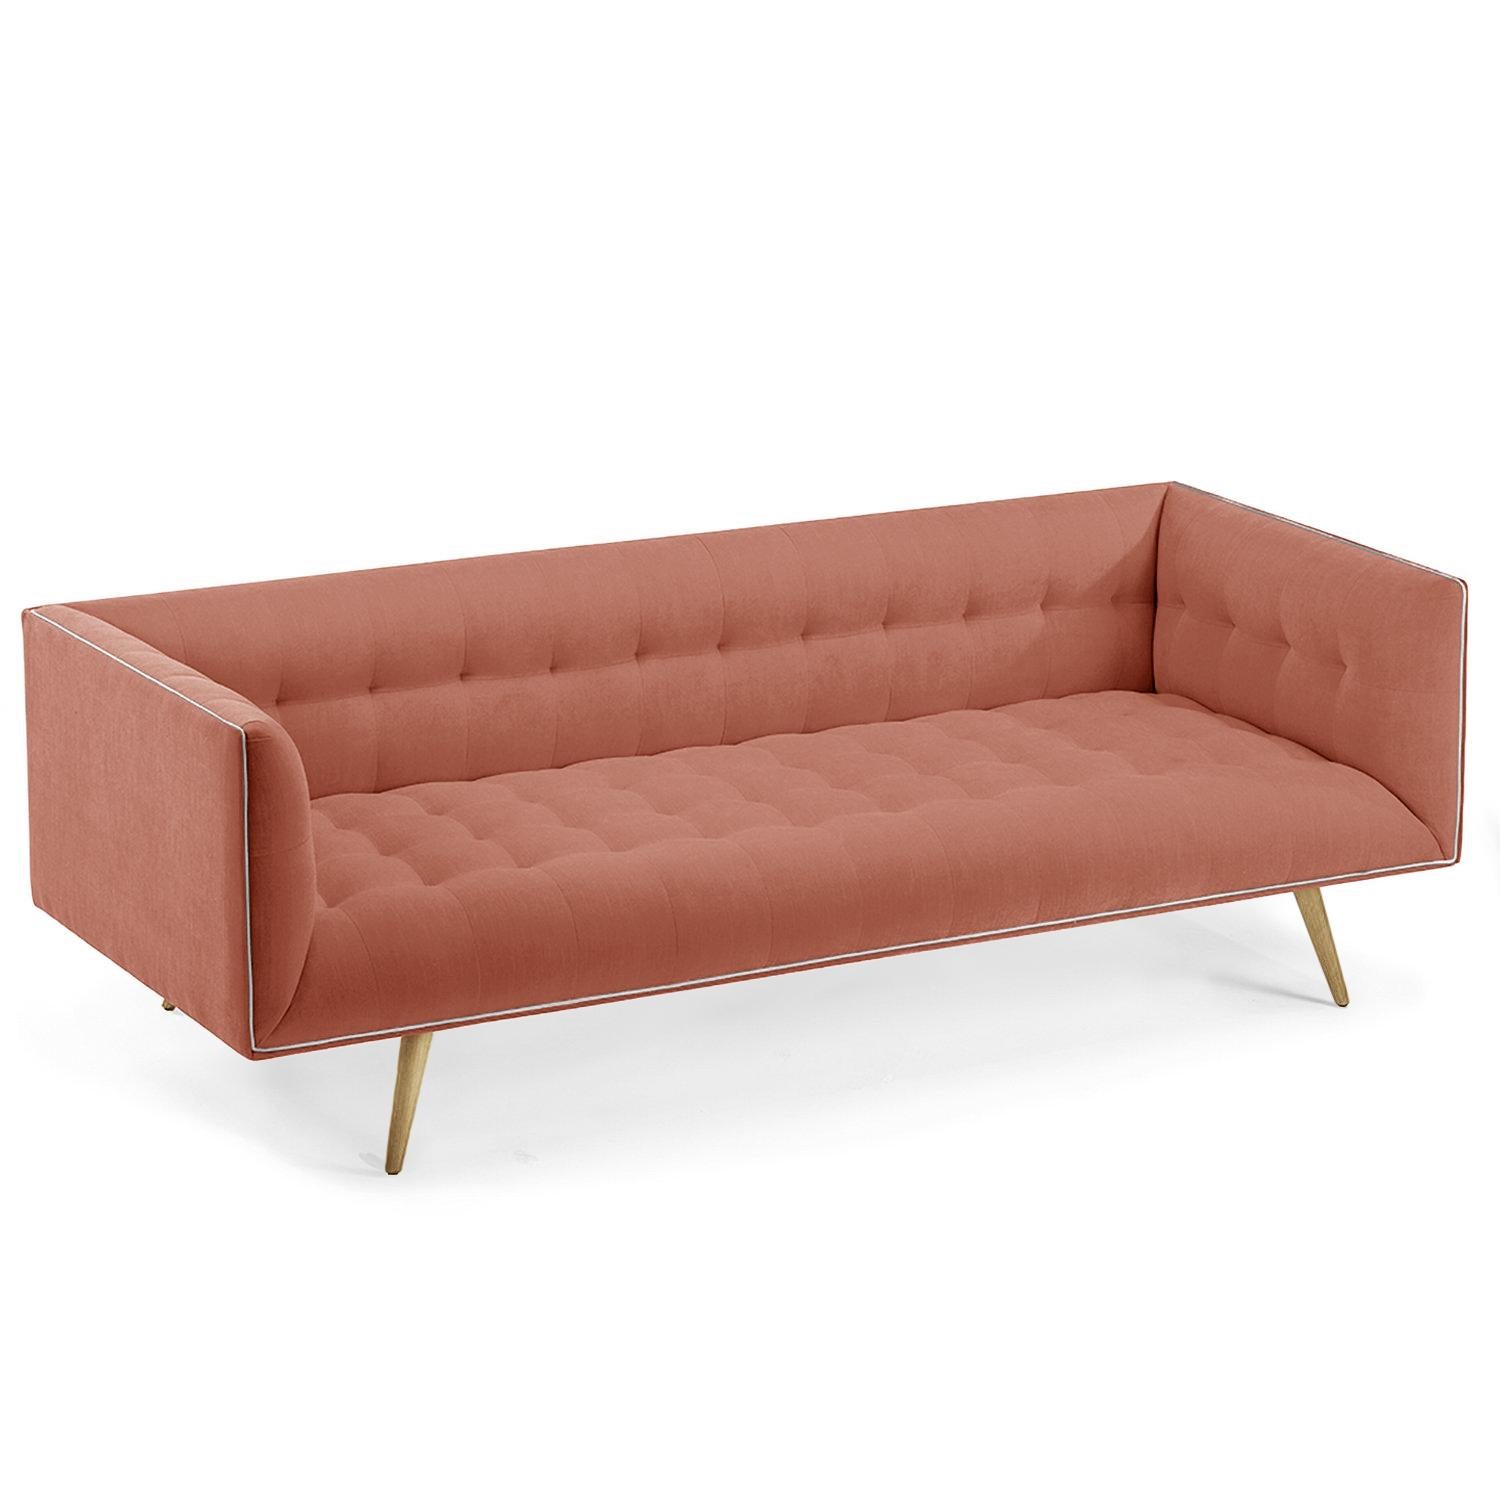 Contemporary Dust Sofa, Medium with Natural Light Oak For Sale